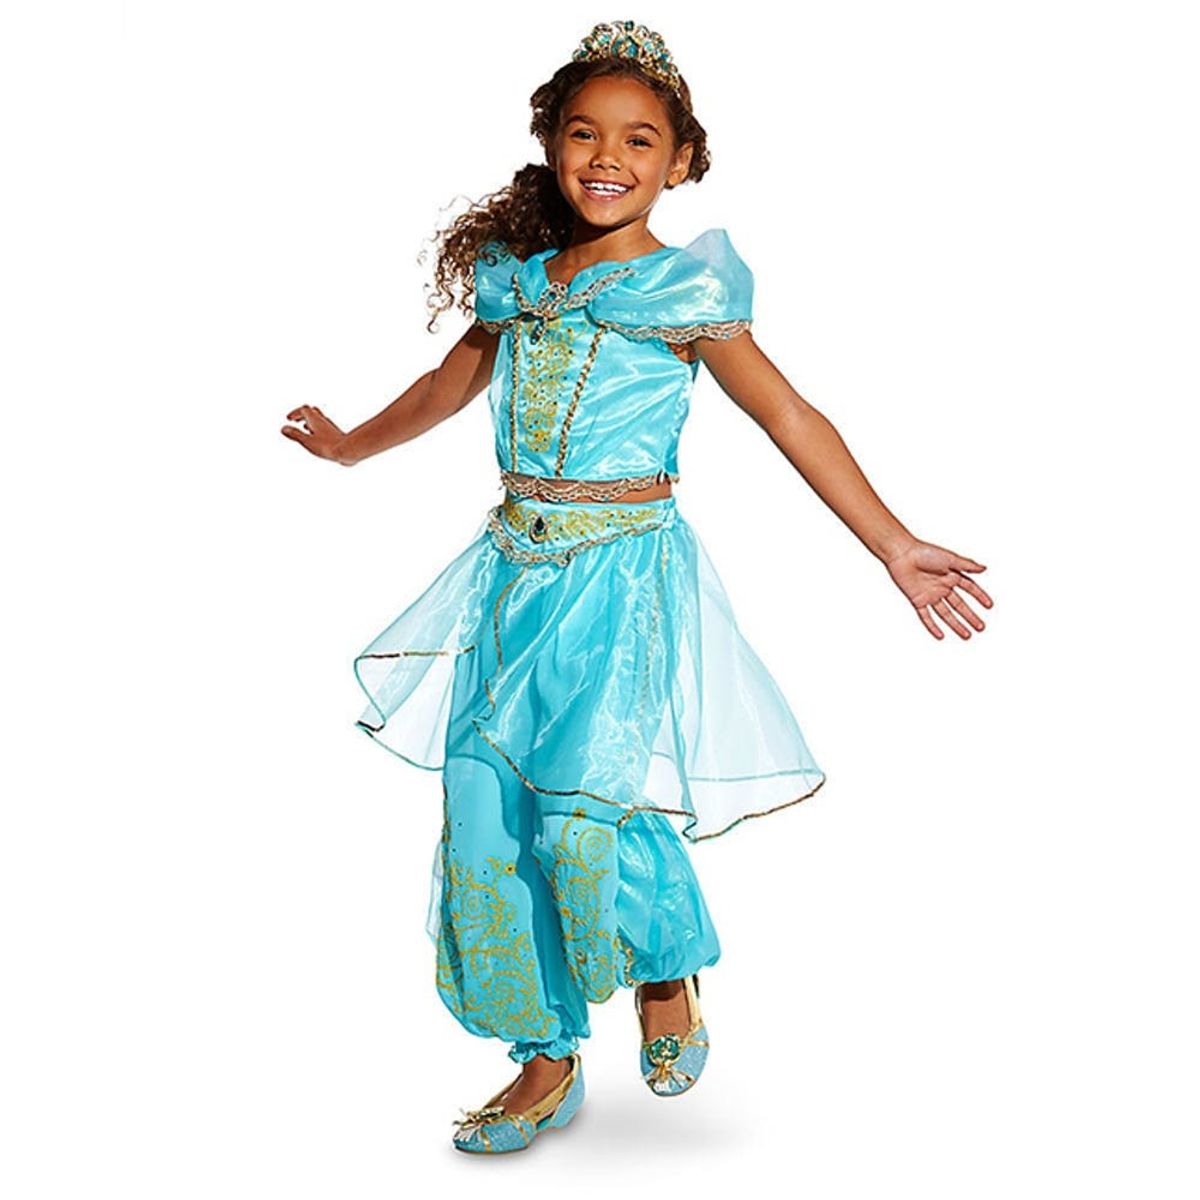 The Major Change Disney Is Making to Its Halloween Costumes for Kids